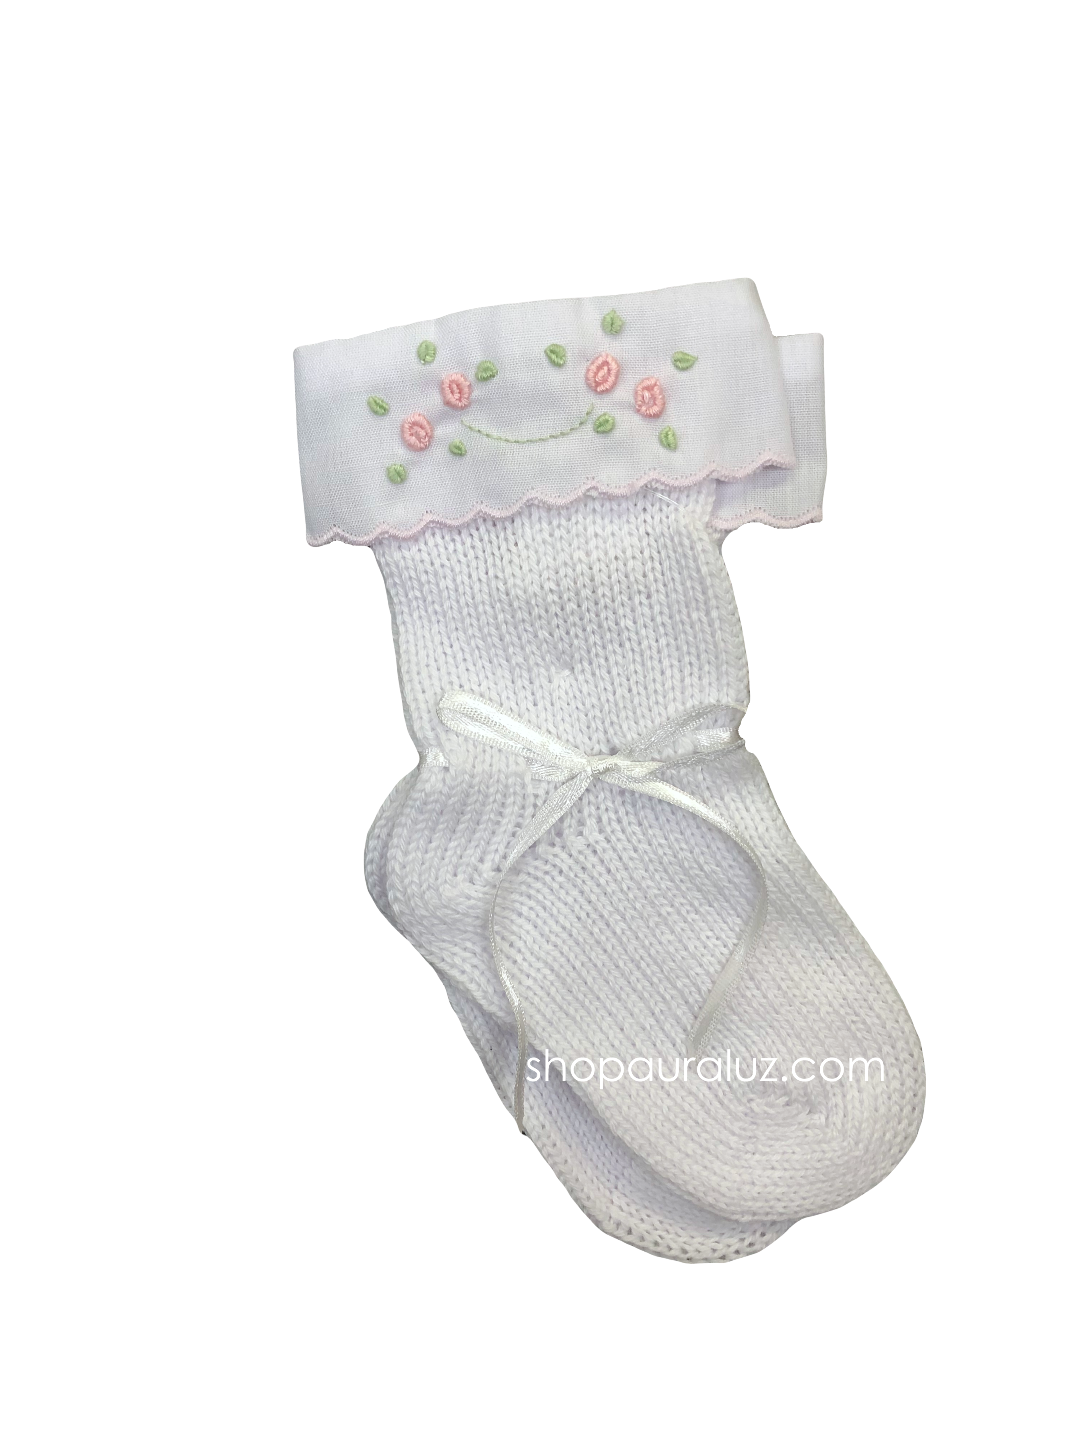 Auraluz Knit Socks...White with pink scallop trim and embroidered tiny buds